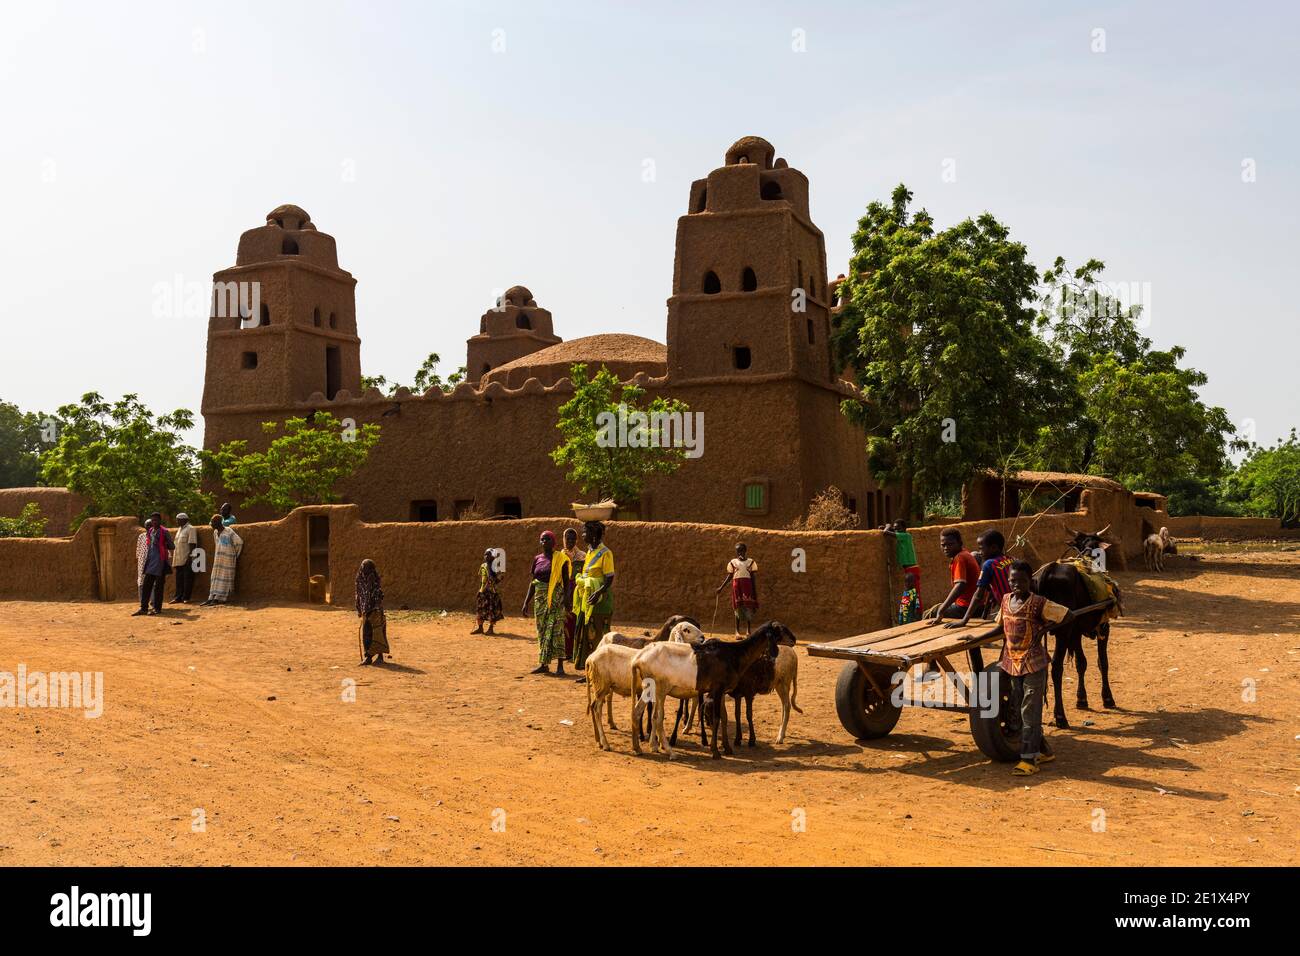 Local people in front of Mosque, Hausa architecture, Yaama, Niger Stock Photo